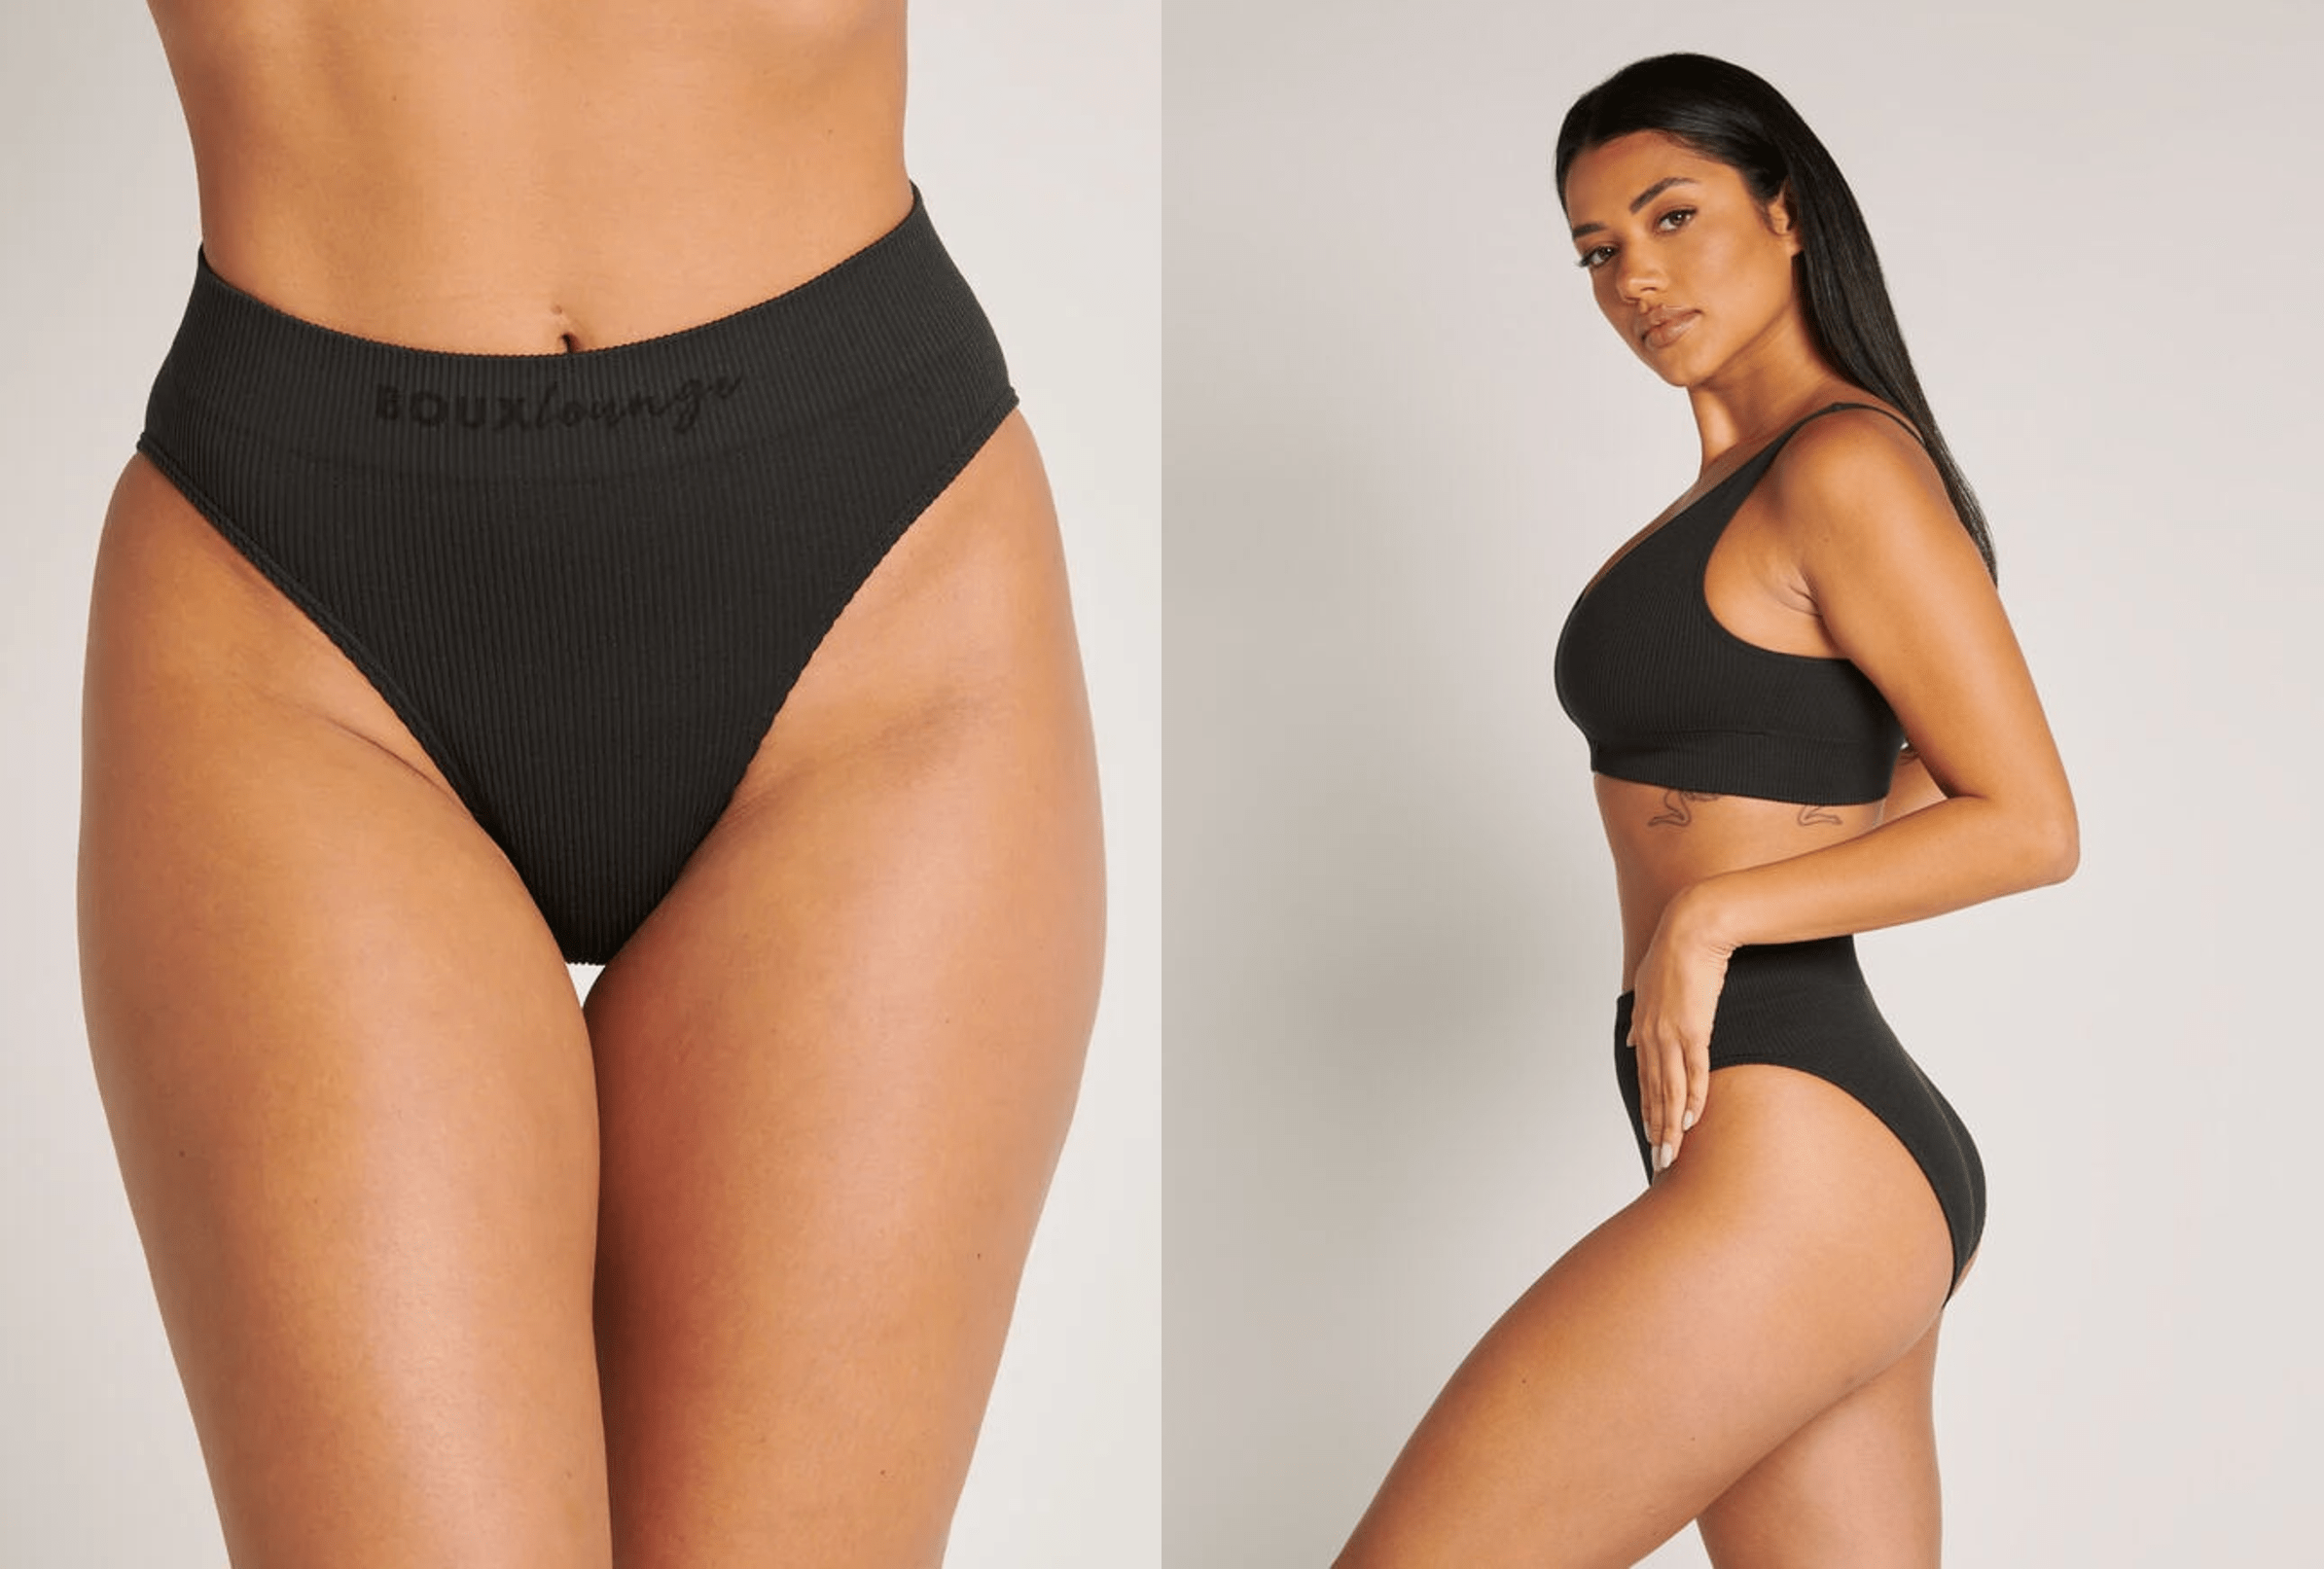 5 Awesome Pairs of Workout Undies